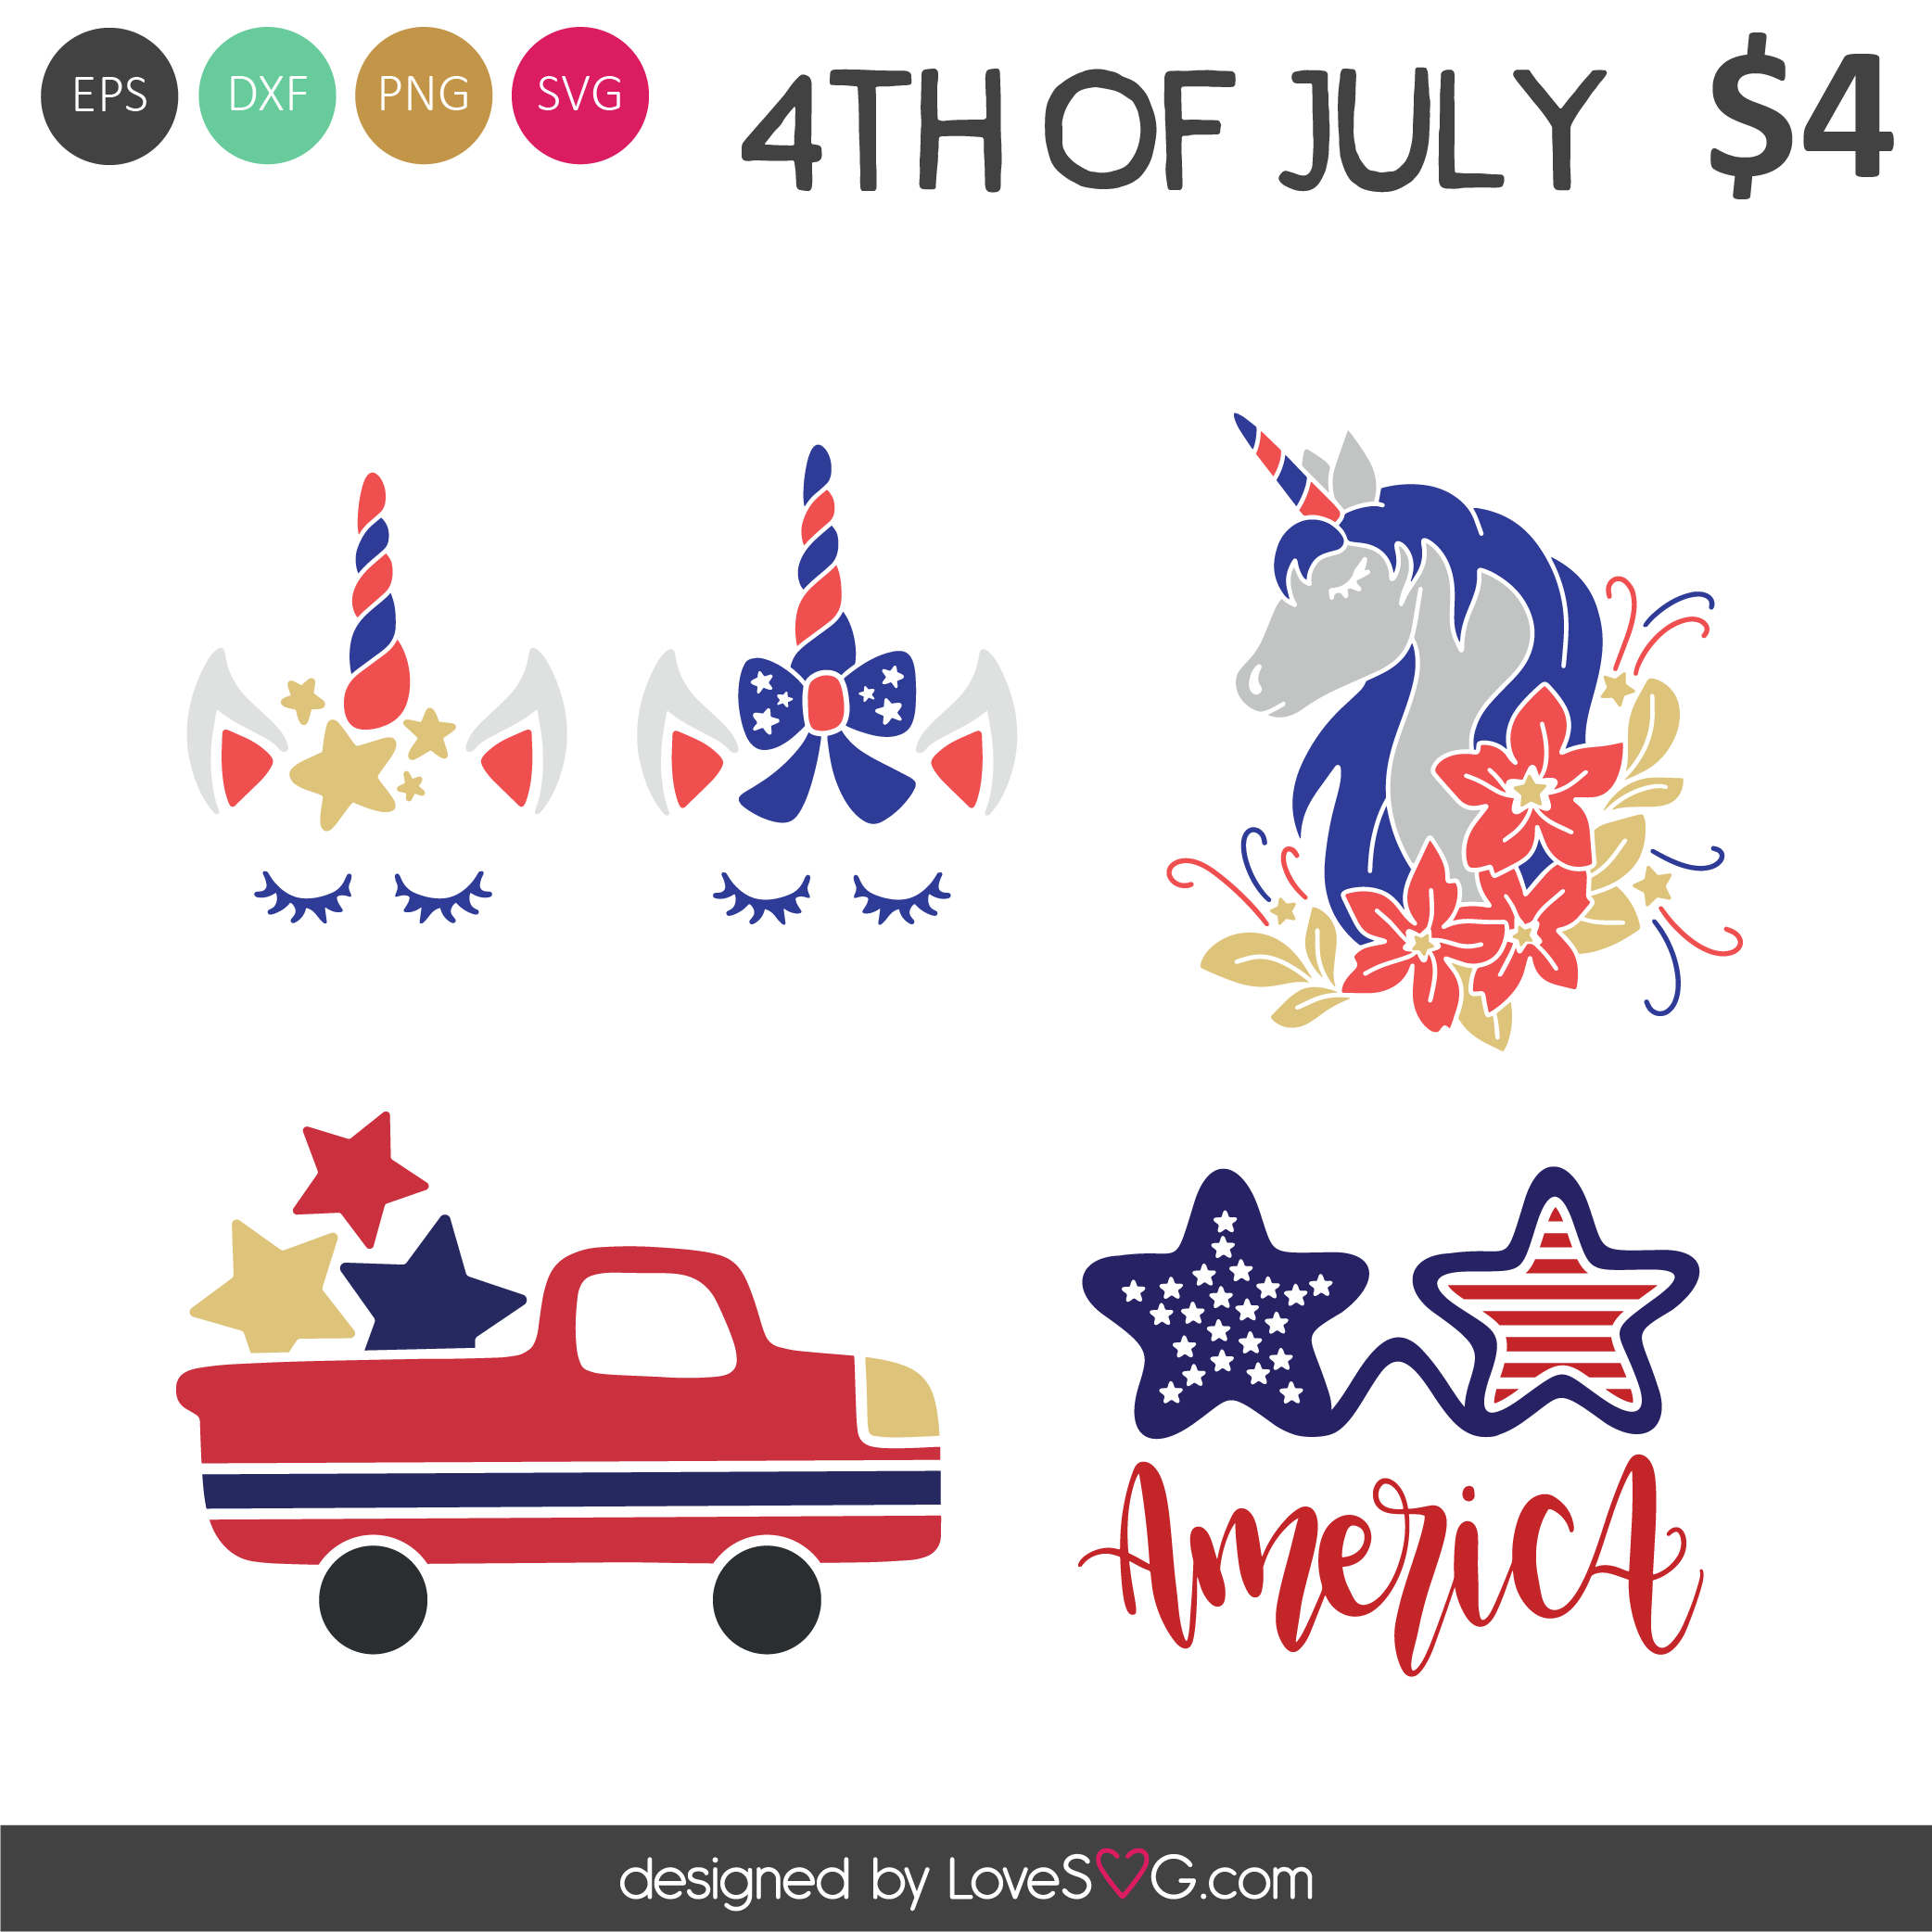 Download 4th Of July Truck And Unicorn Svg Cut Files Lovesvg Com